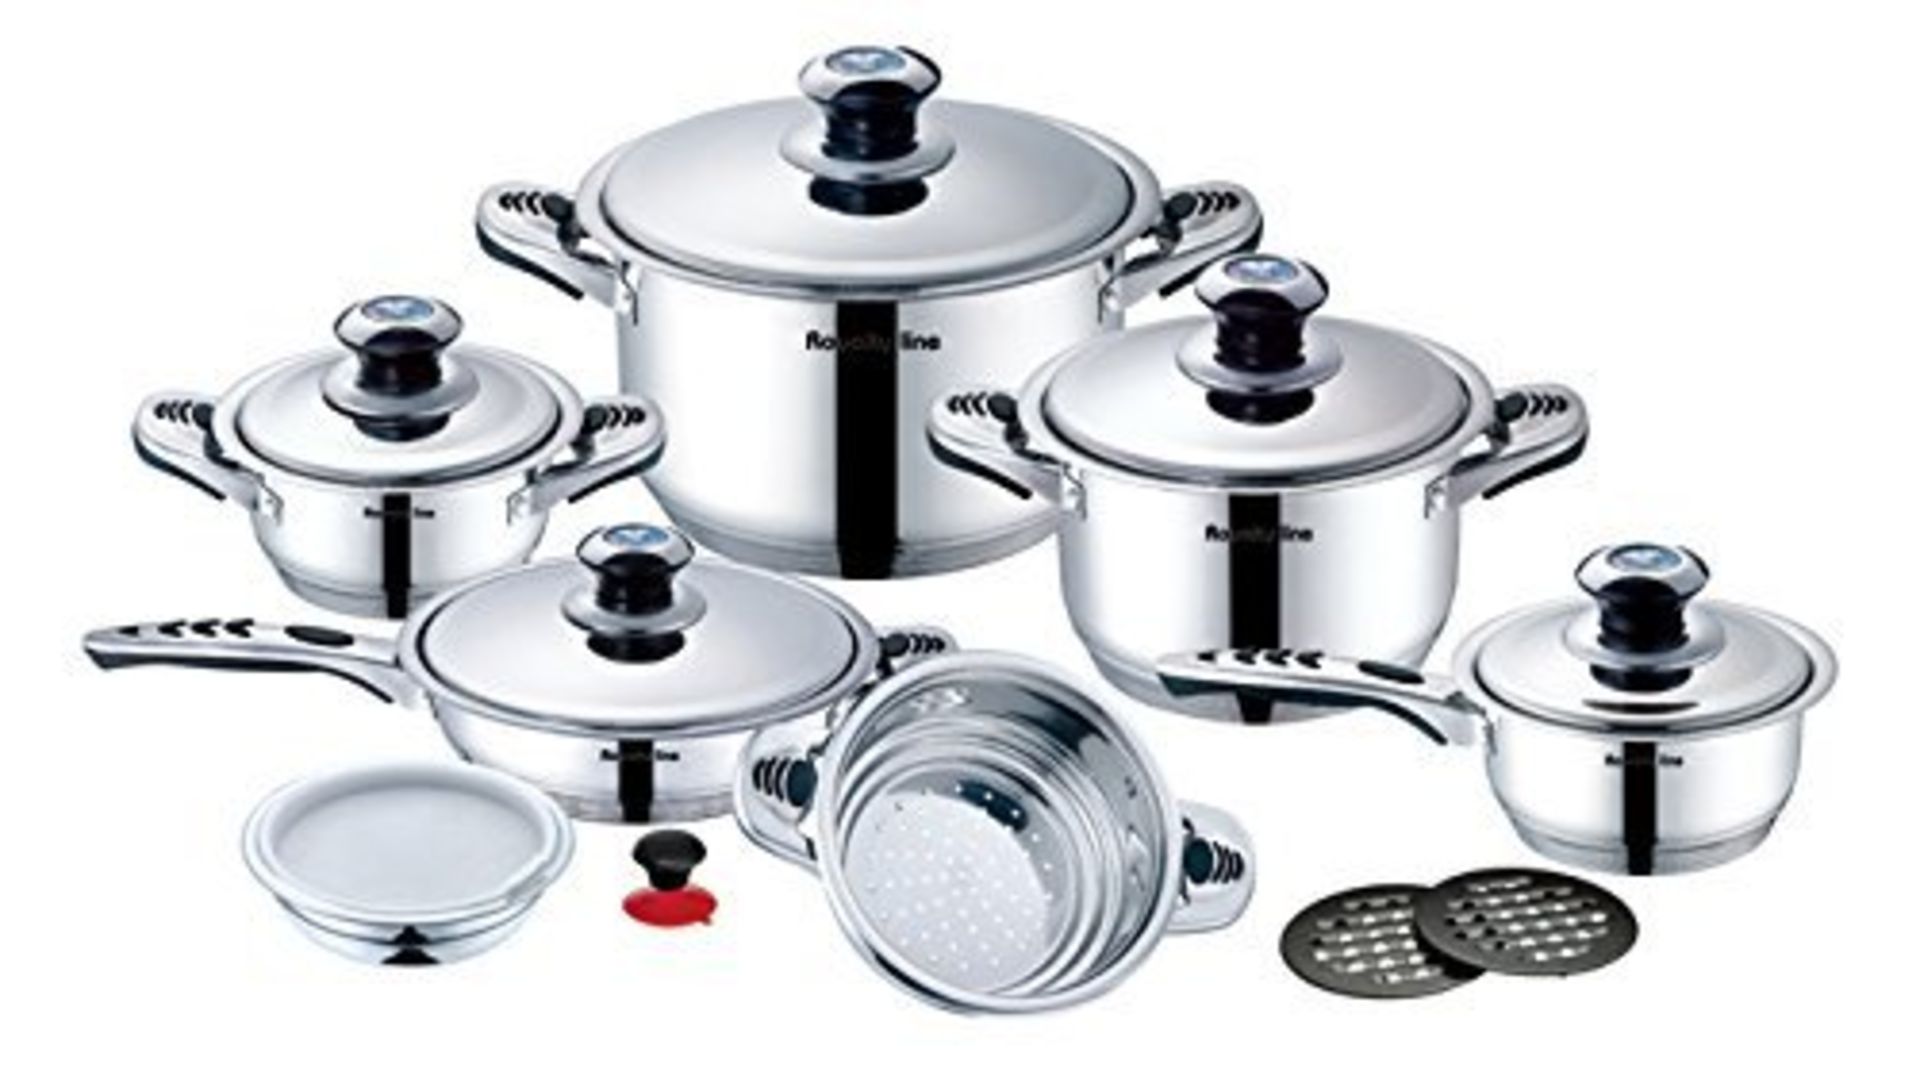 V Brand New 16pc Precision Royalty Line Switzerland Stainless Steel Cooking Set With Glass Lids